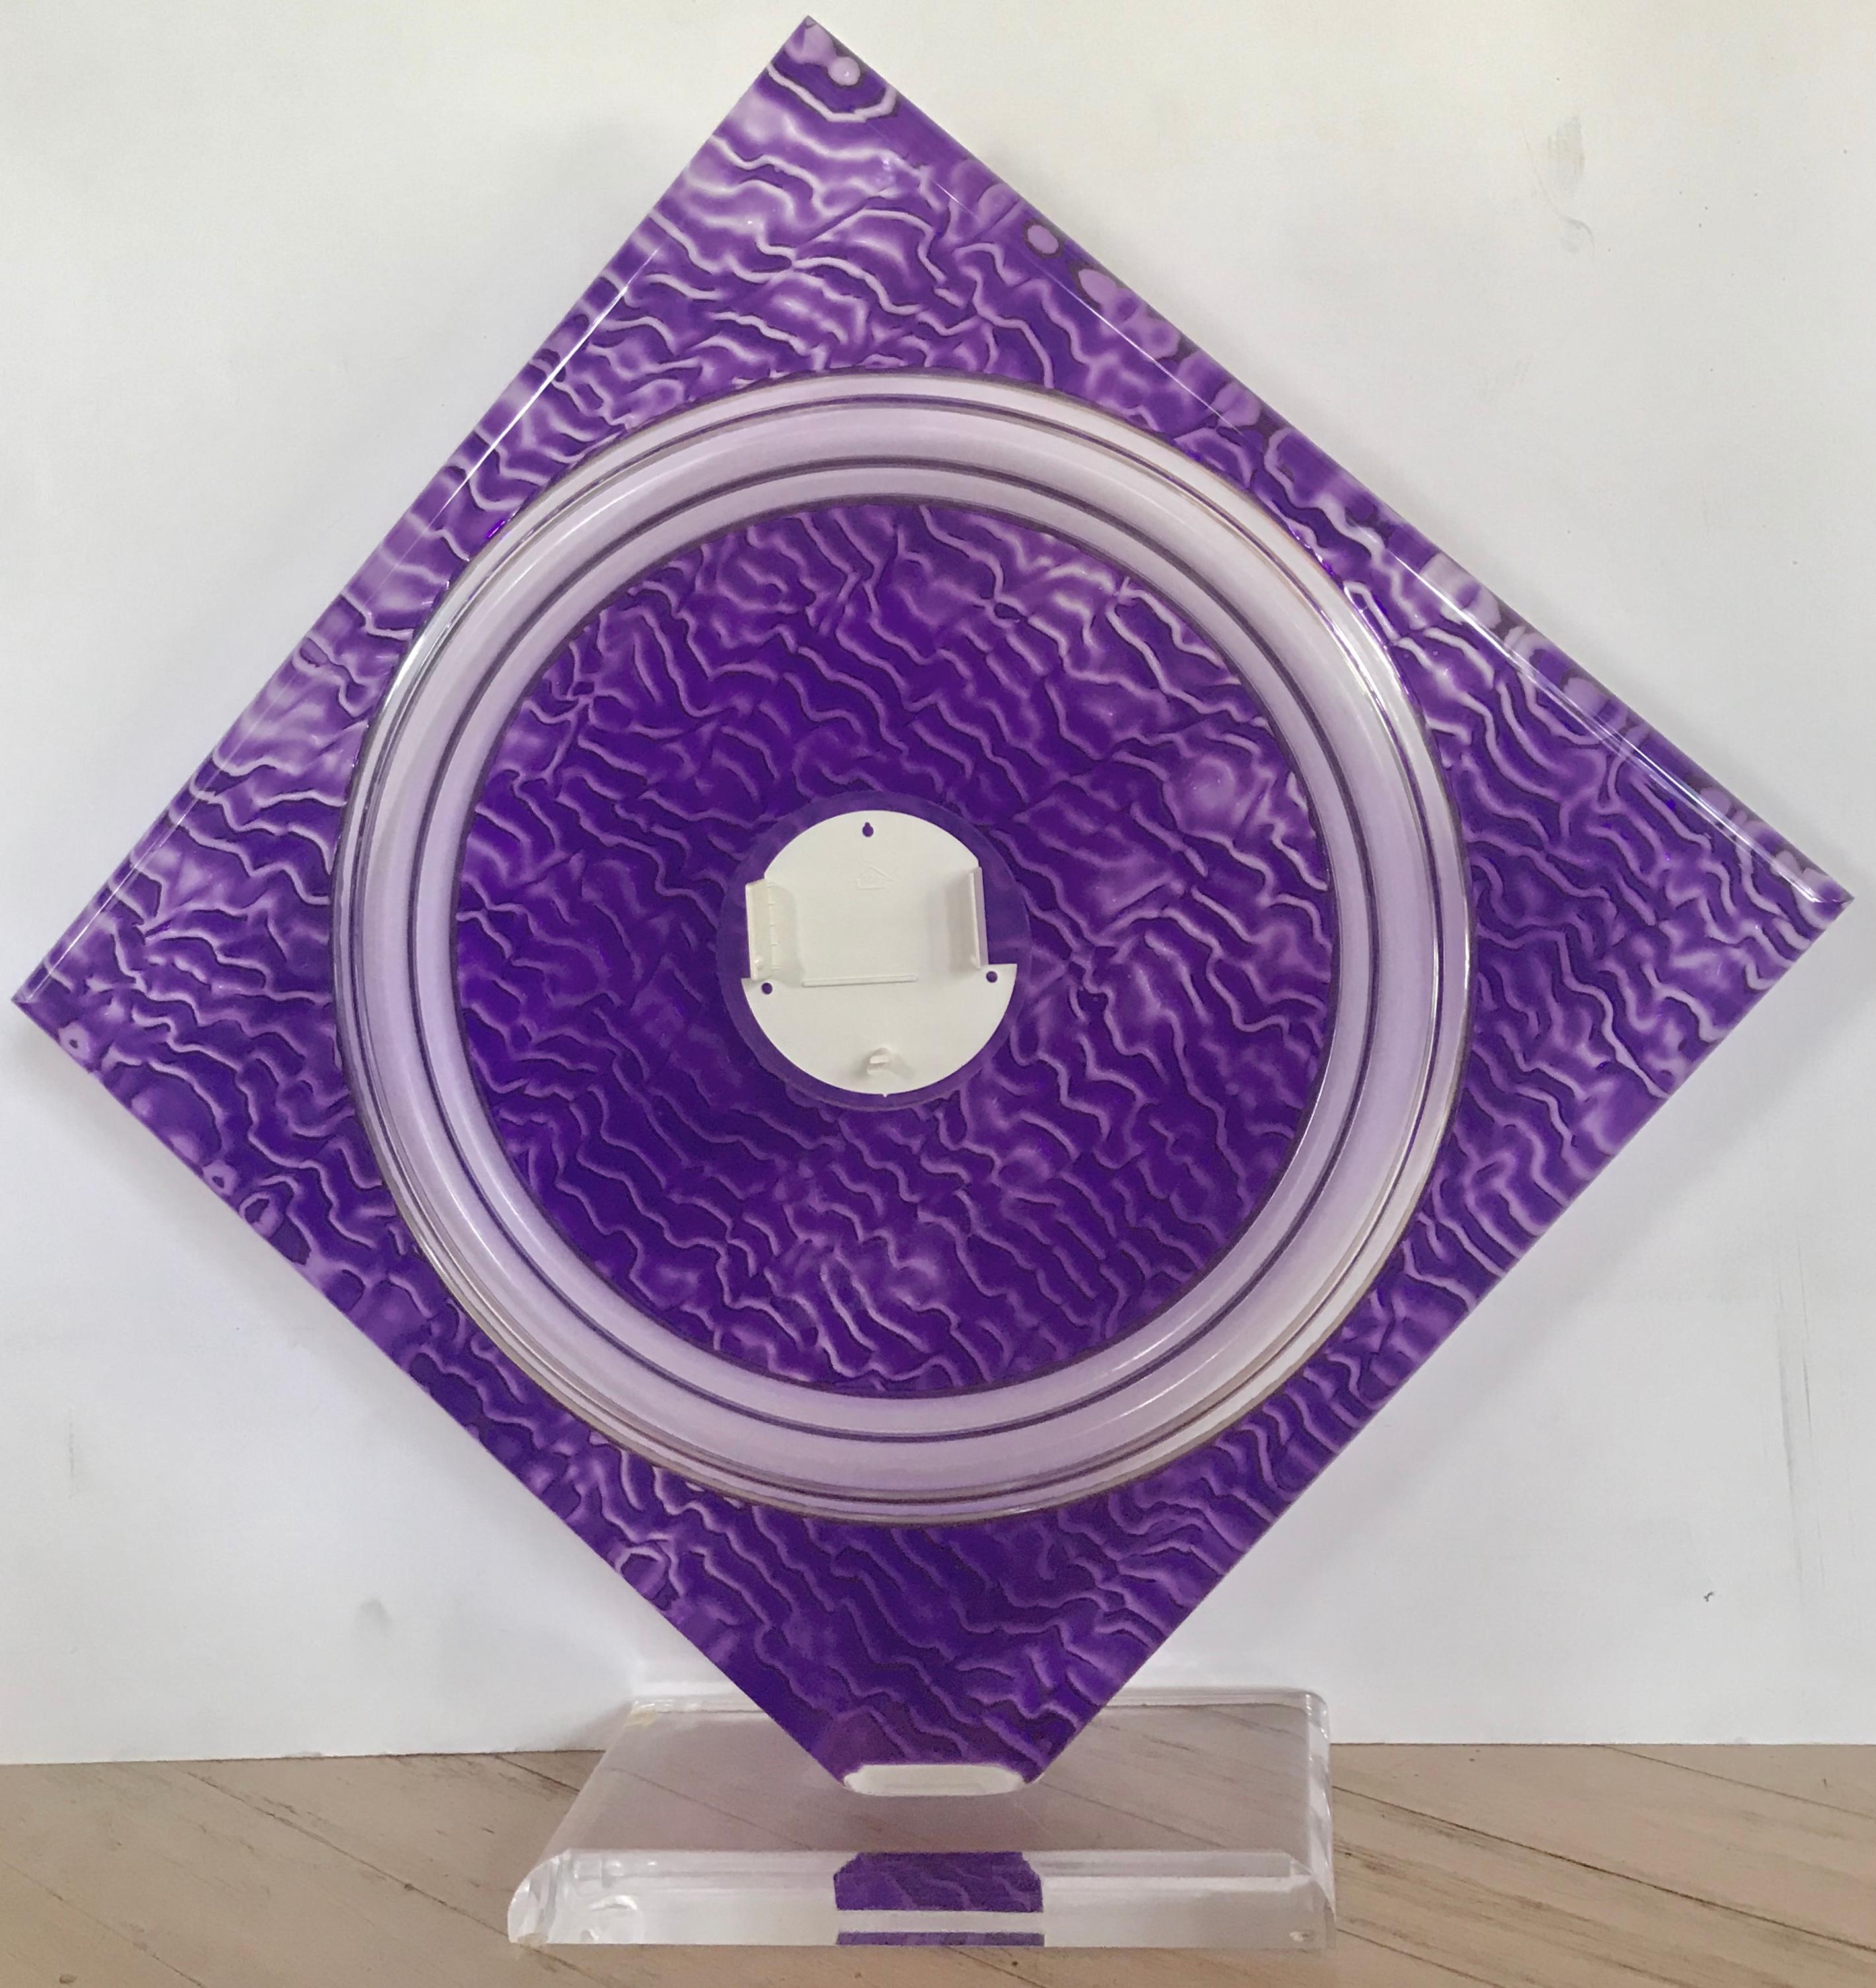 Norman Mercer (American, 1916-2007) Purple Cast Acrylic Sculpture. The amethyst diamond shaped sculpture is mounted on a beveled acrylic base. Cast with a repeating geometric pattern. In the back center of the step formed center circle, is a holder